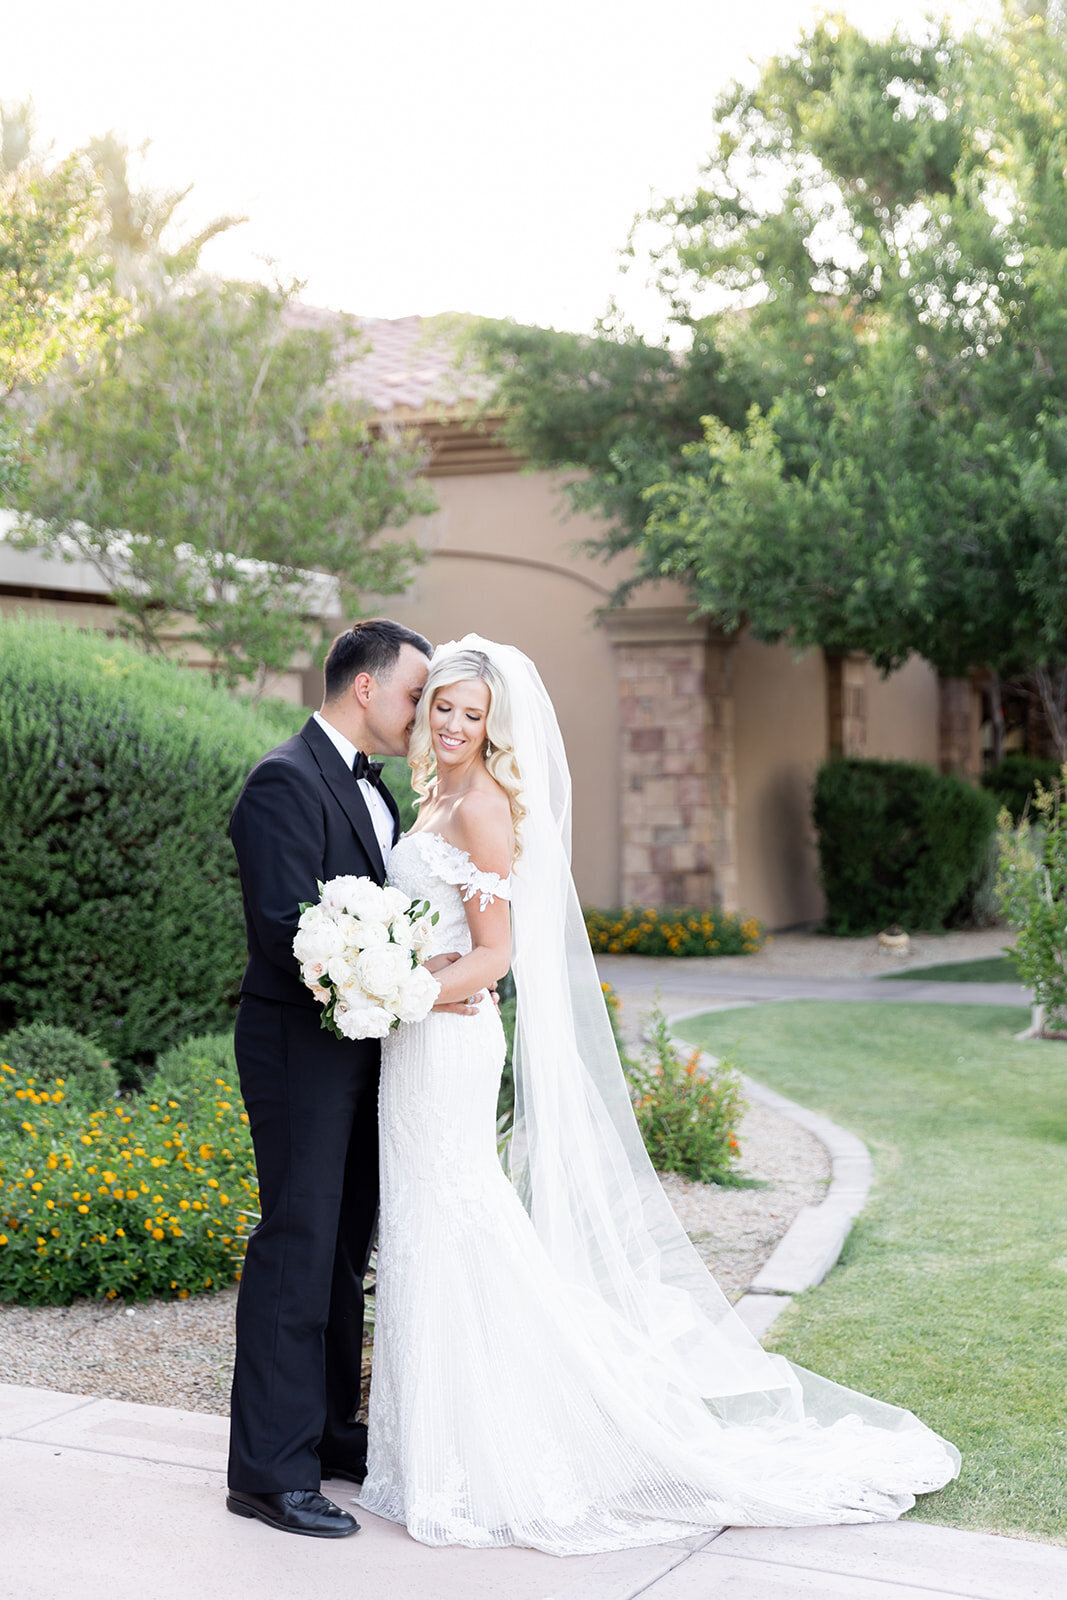 Karlie Colleen Photography - Holly & Ronnie Wedding - Seville Country Club - Gilbert Arizona-637